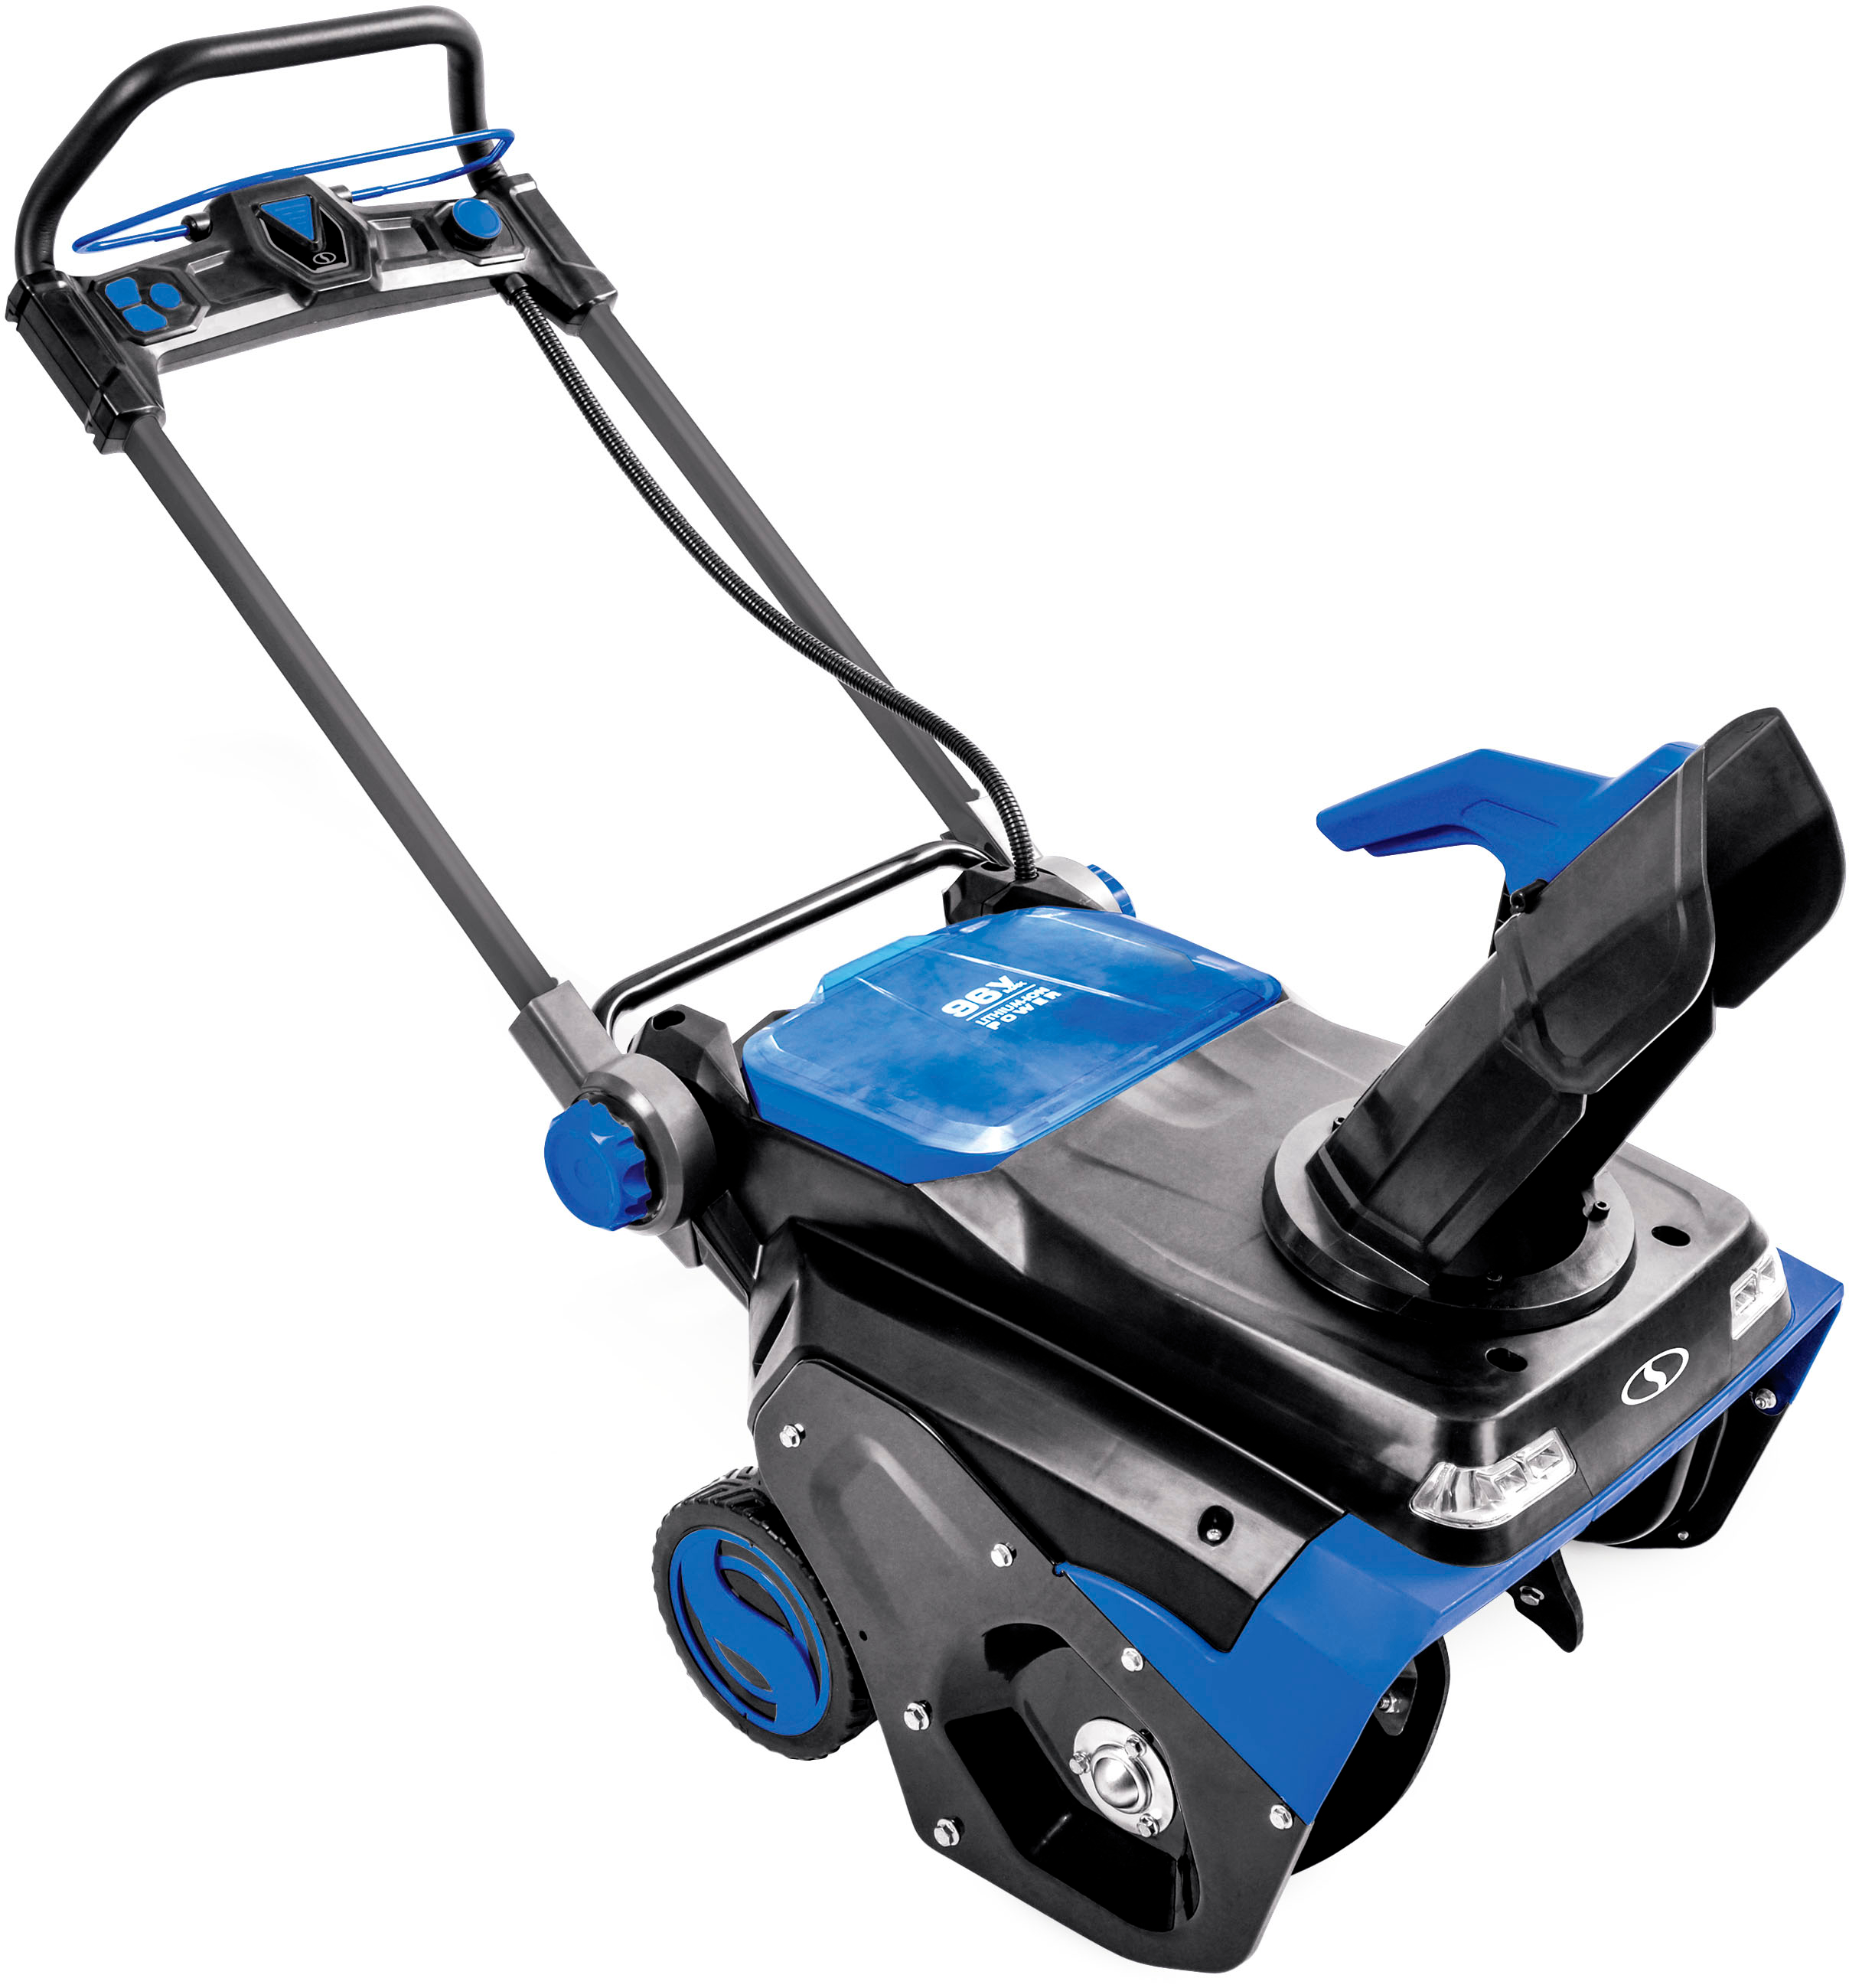 Angle View: Snow Joe - 24V Single Stage Cordless Brushless Electric Snow Blower (4x12.0 Ah Batteries and 2 Chargers) - Black and Blue